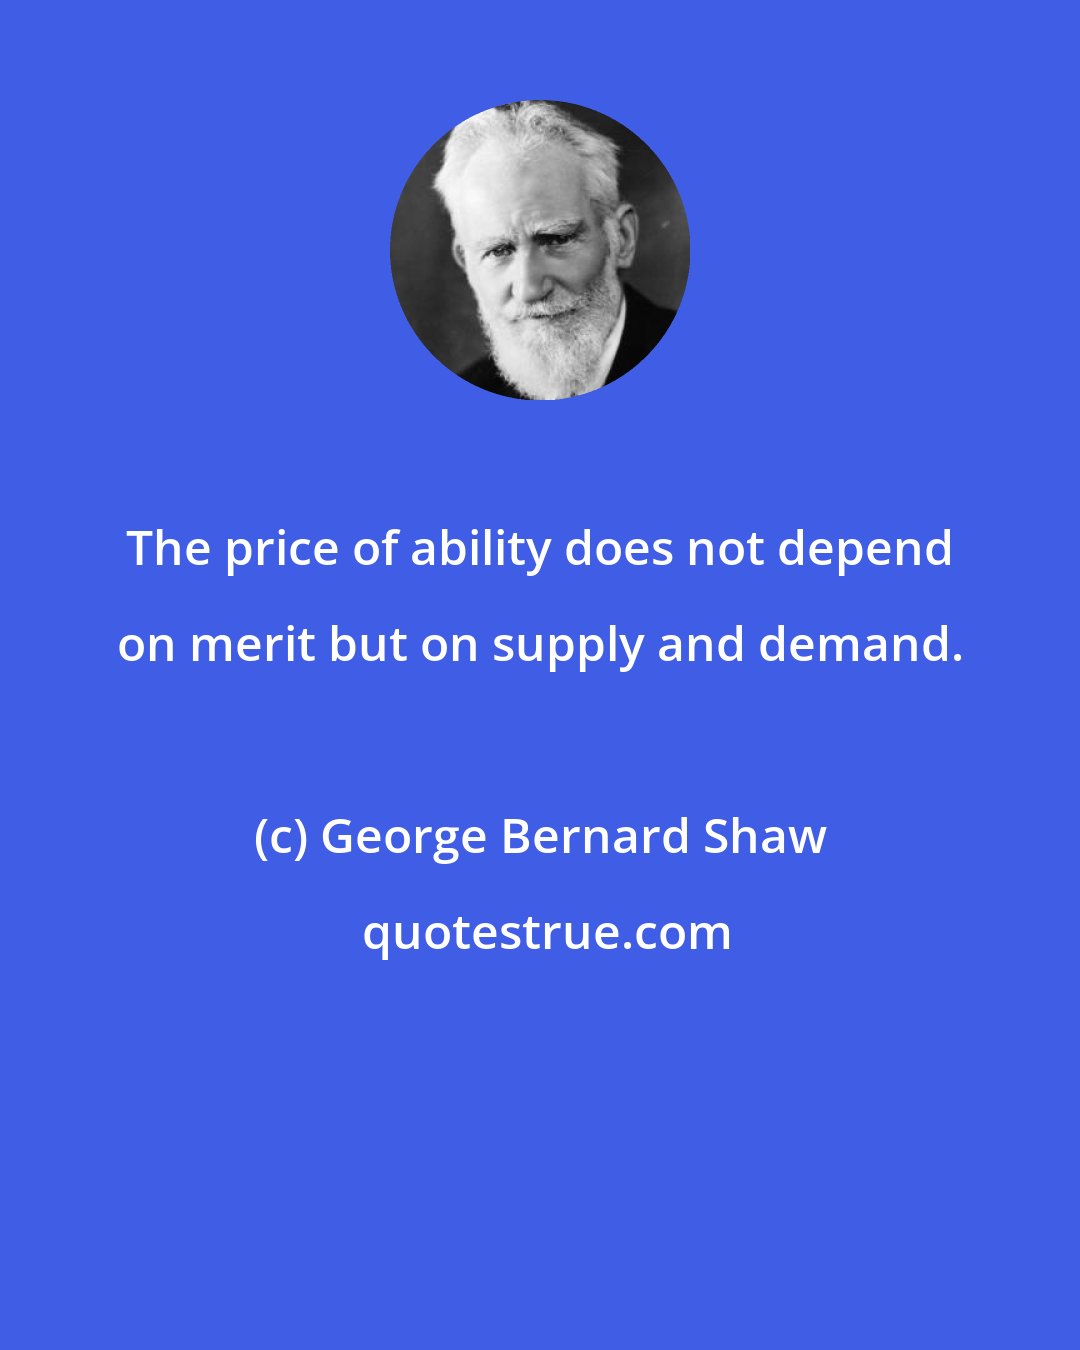 George Bernard Shaw: The price of ability does not depend on merit but on supply and demand.